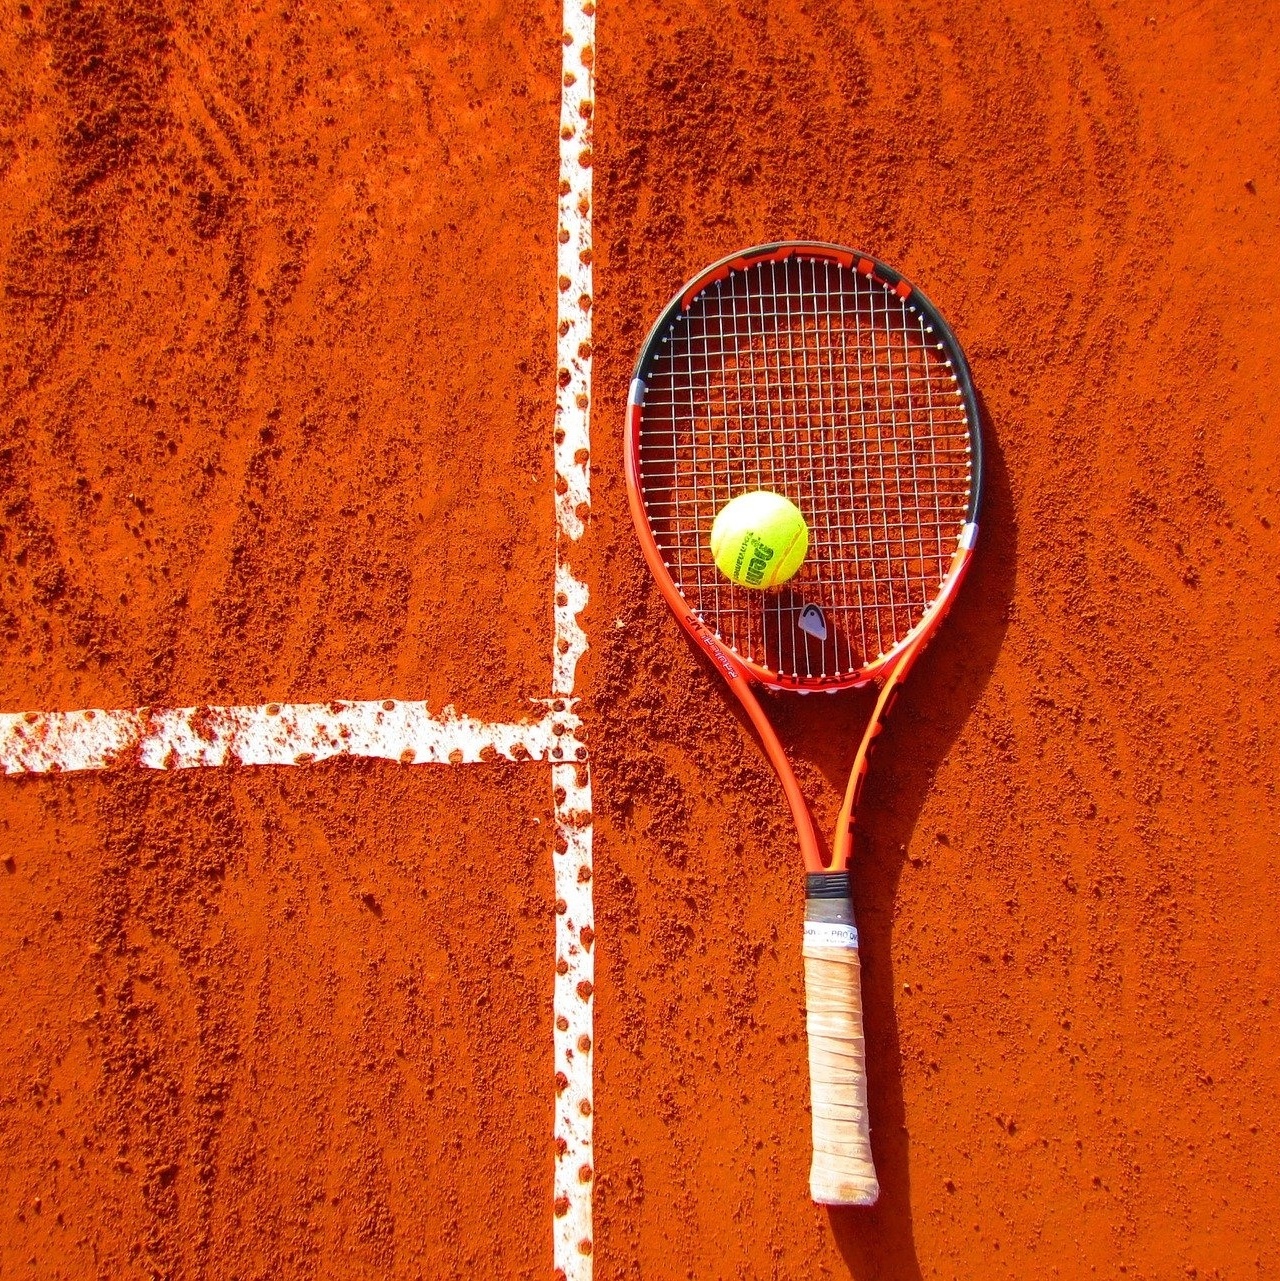 Lavoro supports the International Tennis Championship, in Campinas